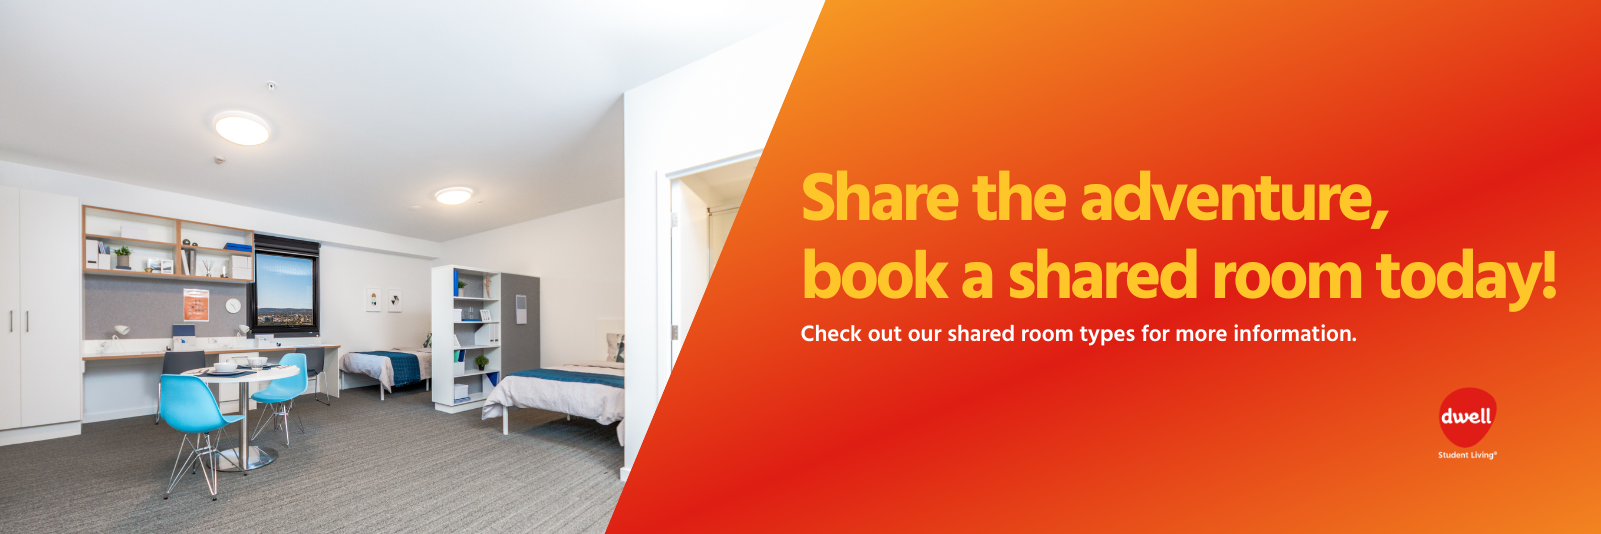 share-the-adventure-book-a-shared-room-today